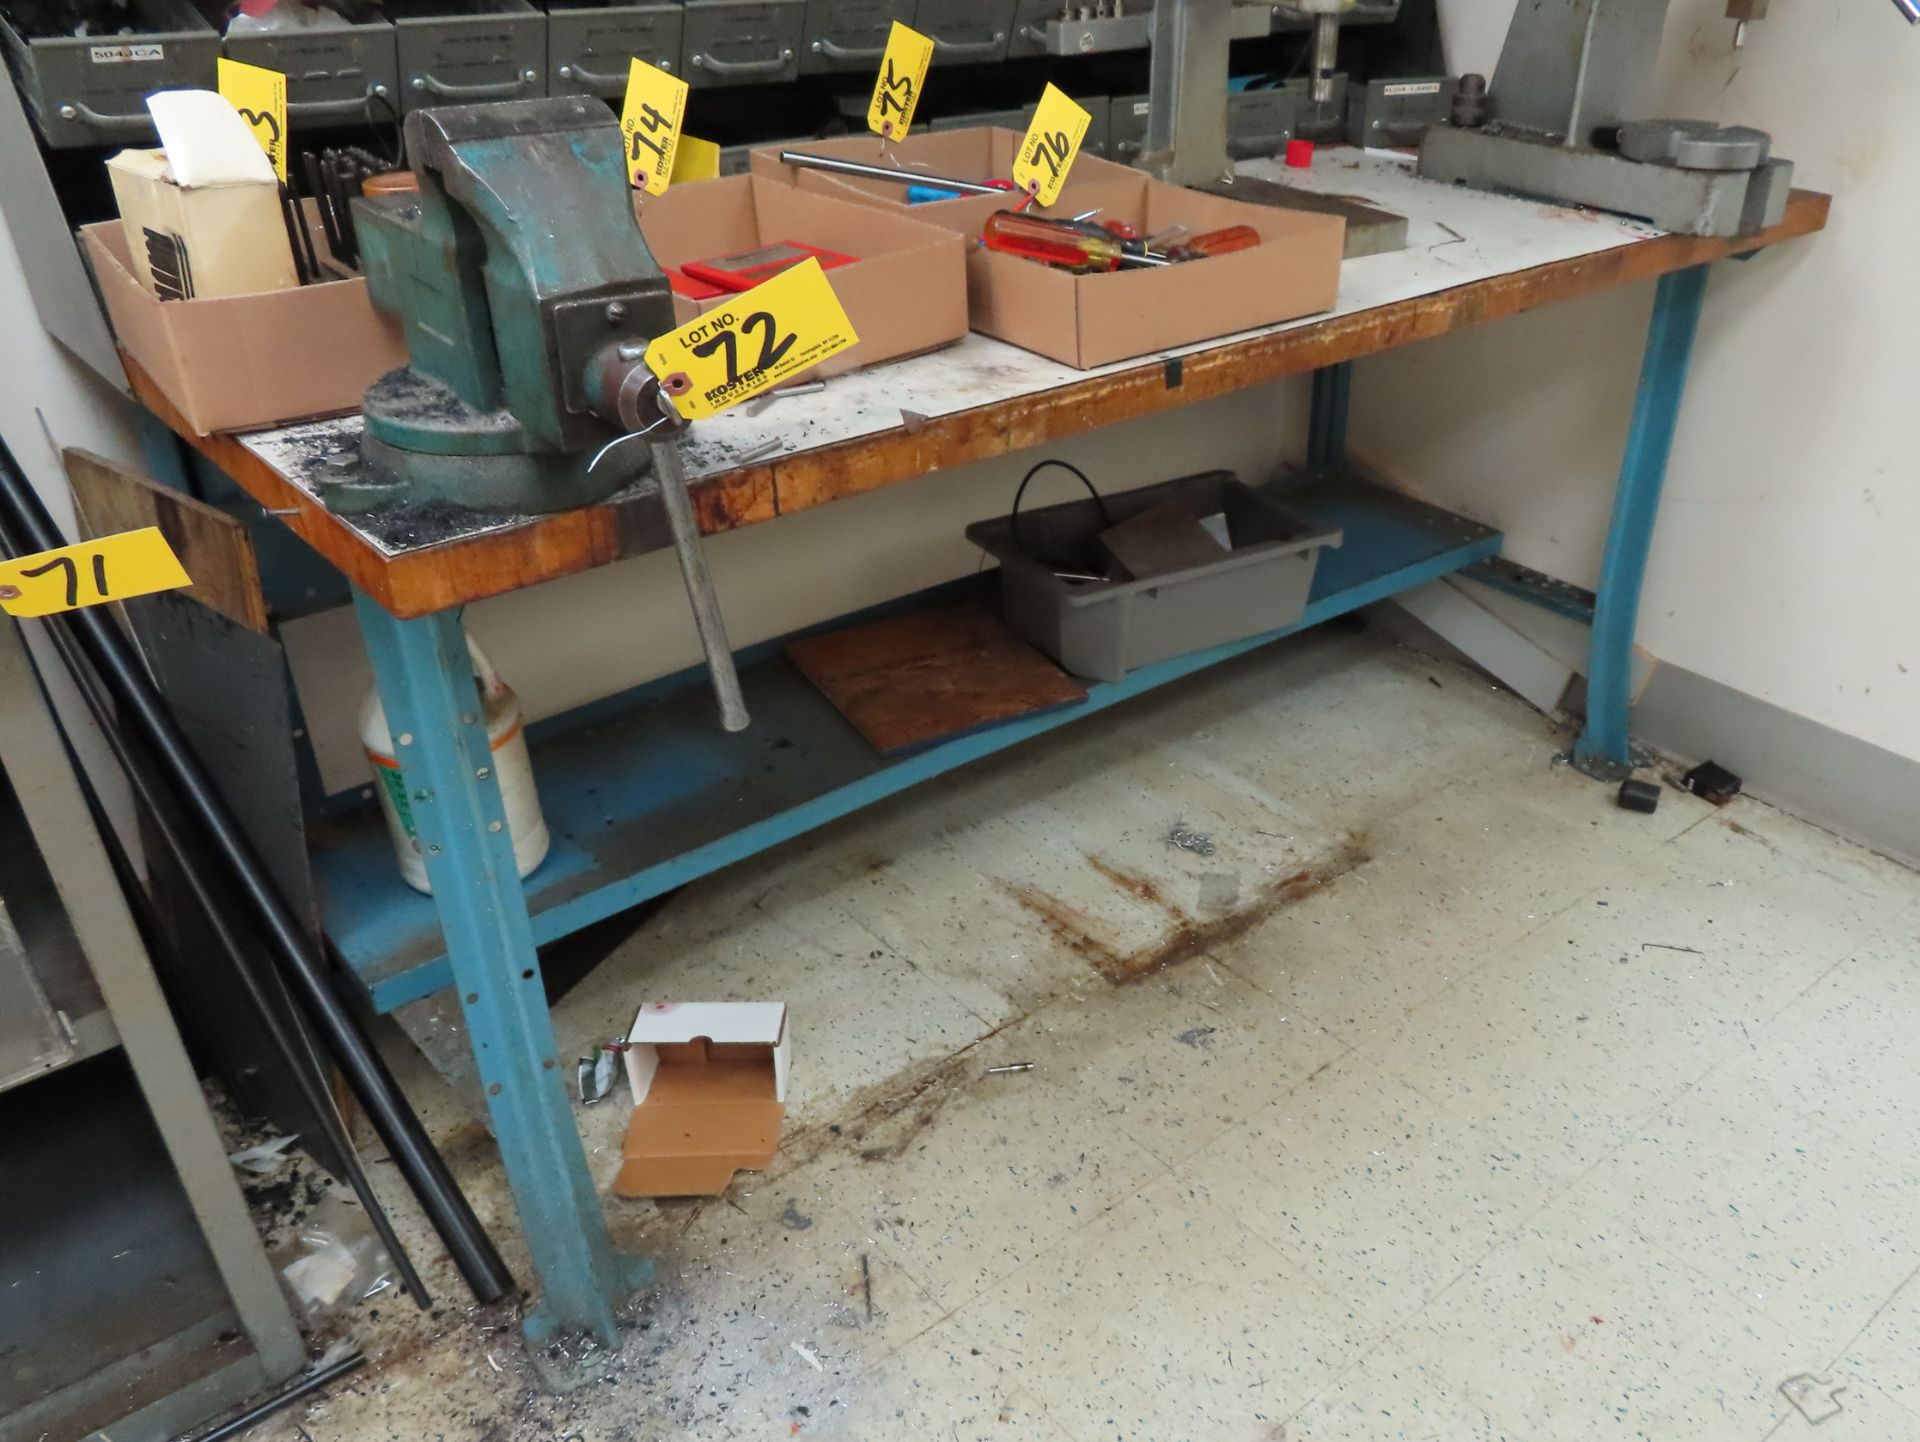 4" BENCH VISE BY PARKER, WITH WOOD TOP WORK BENCH, 72" X 36" & APPROXIMATELY [36] EQUIPTO DRAW